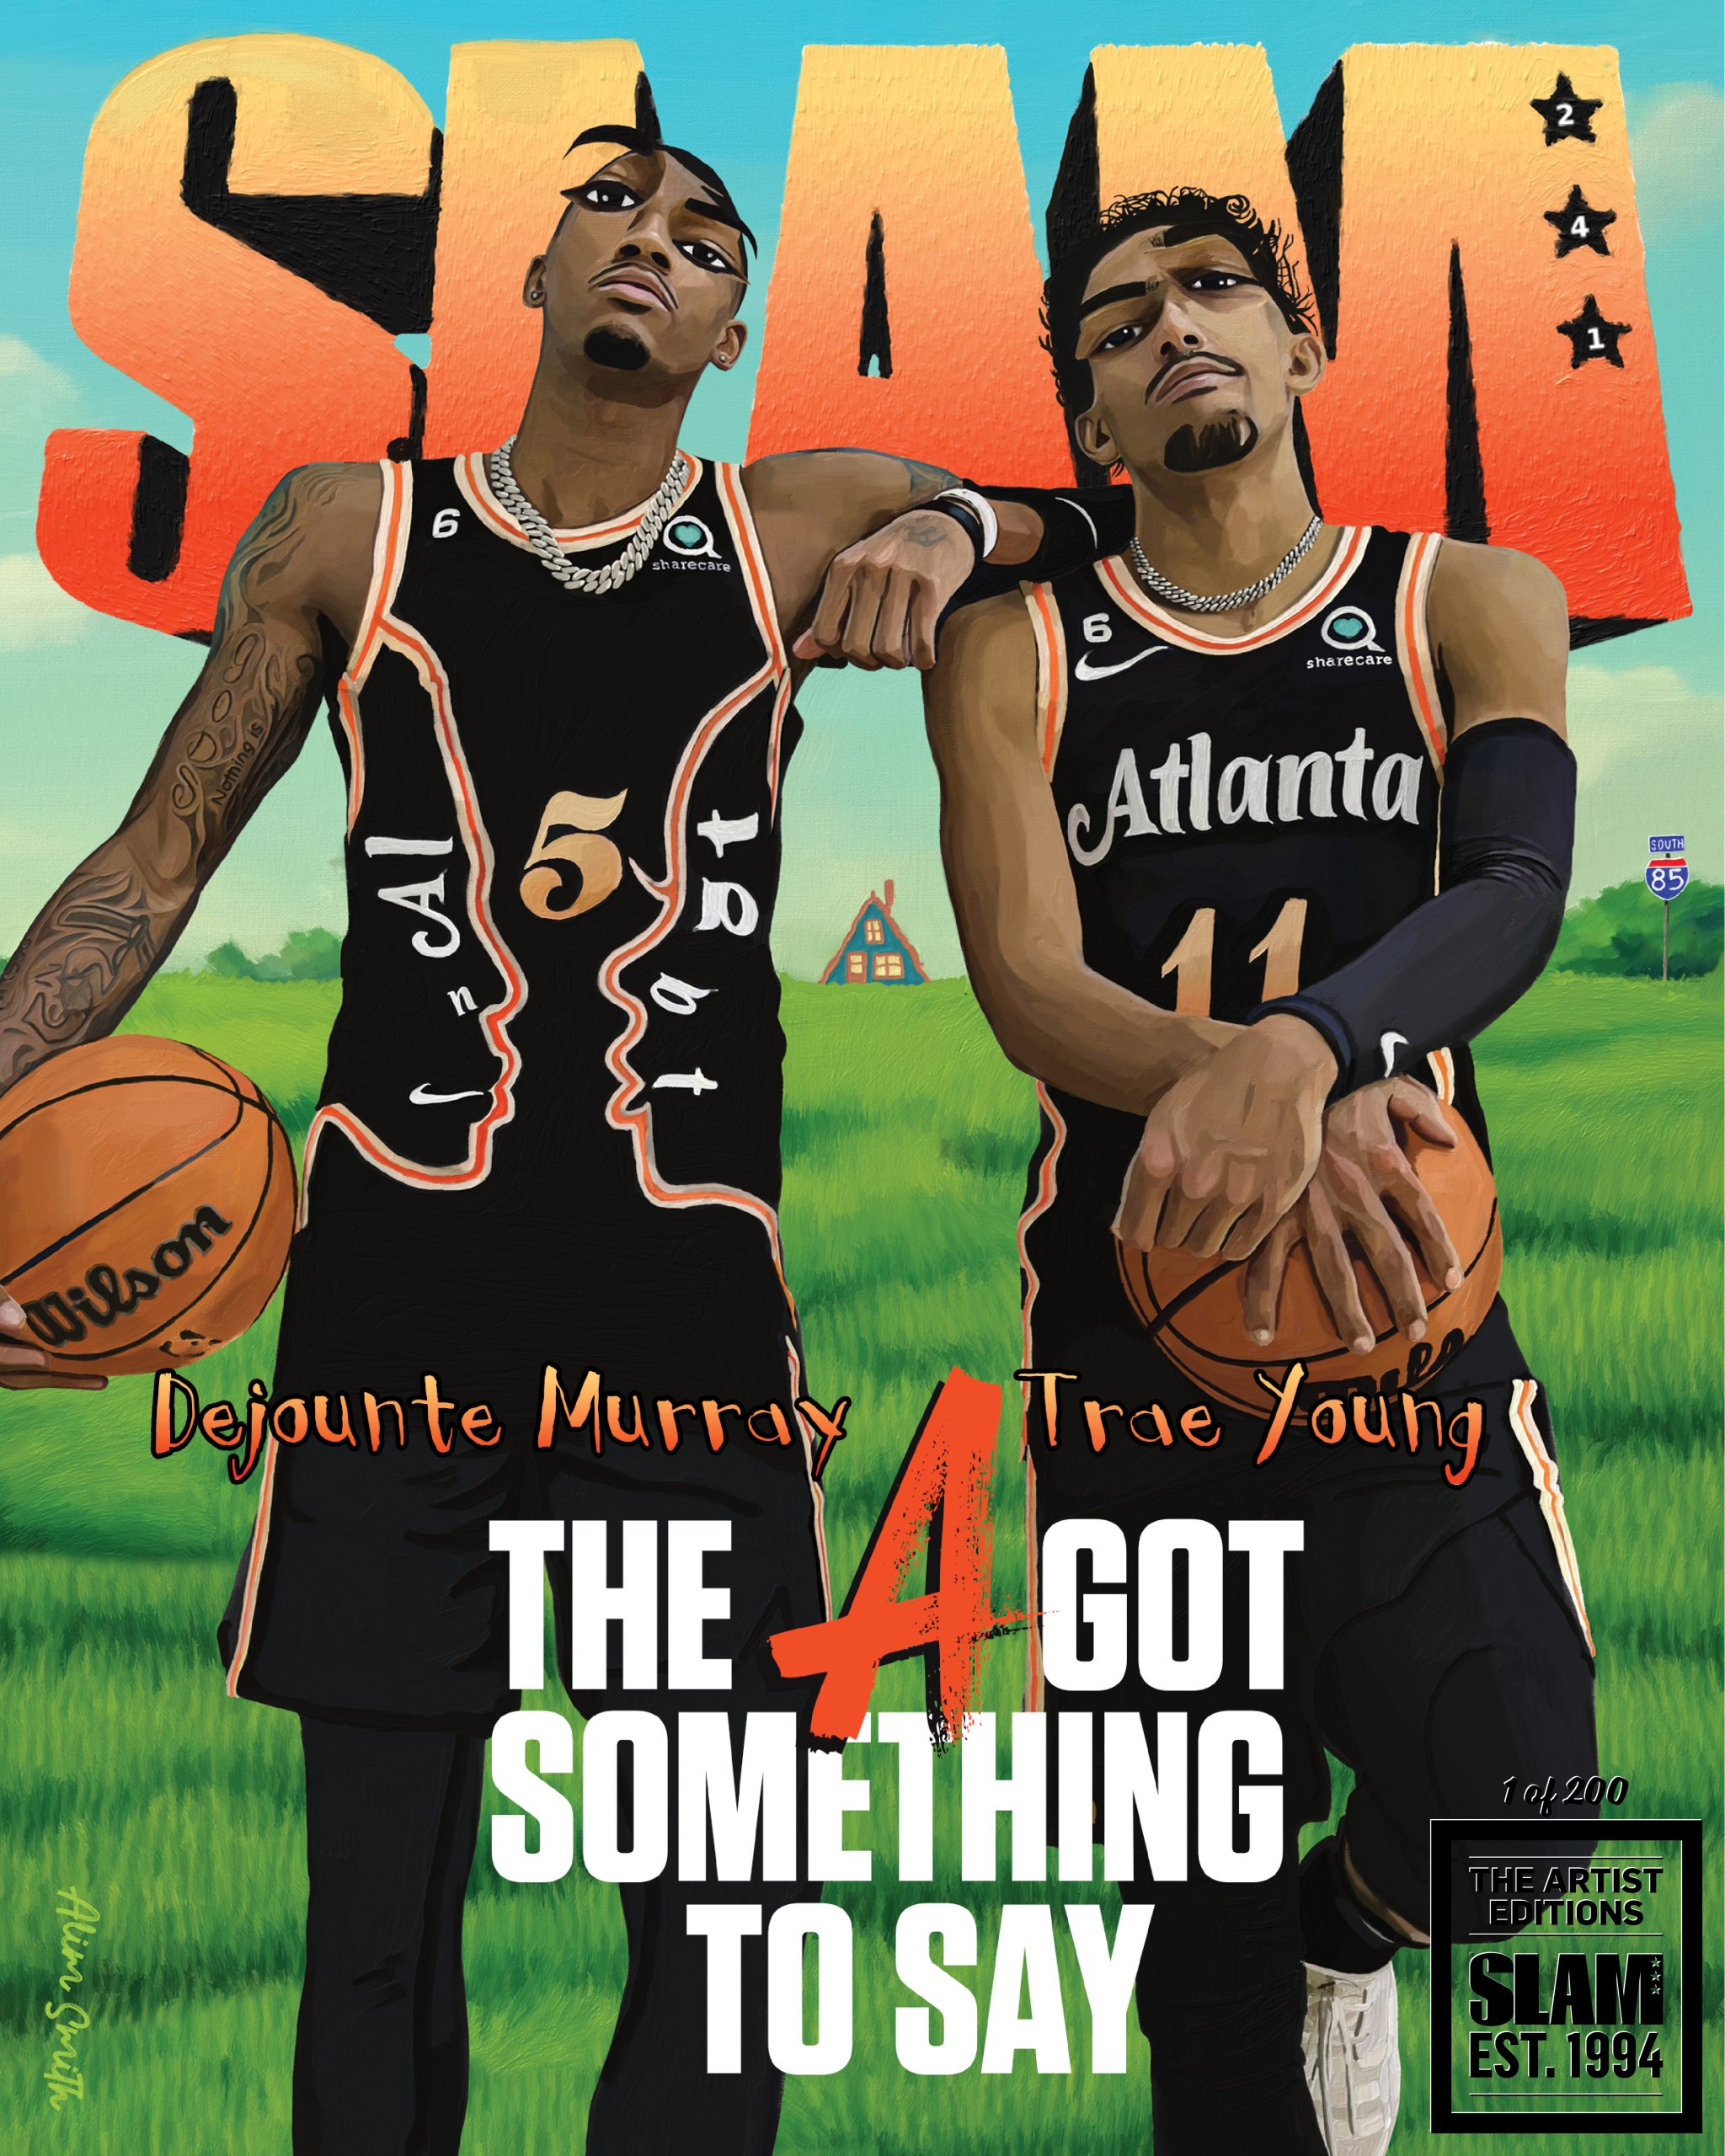 The SLAM Cover Artist Series Features Limited-Edition SLAM Covers Reimagined by Innovative Artists